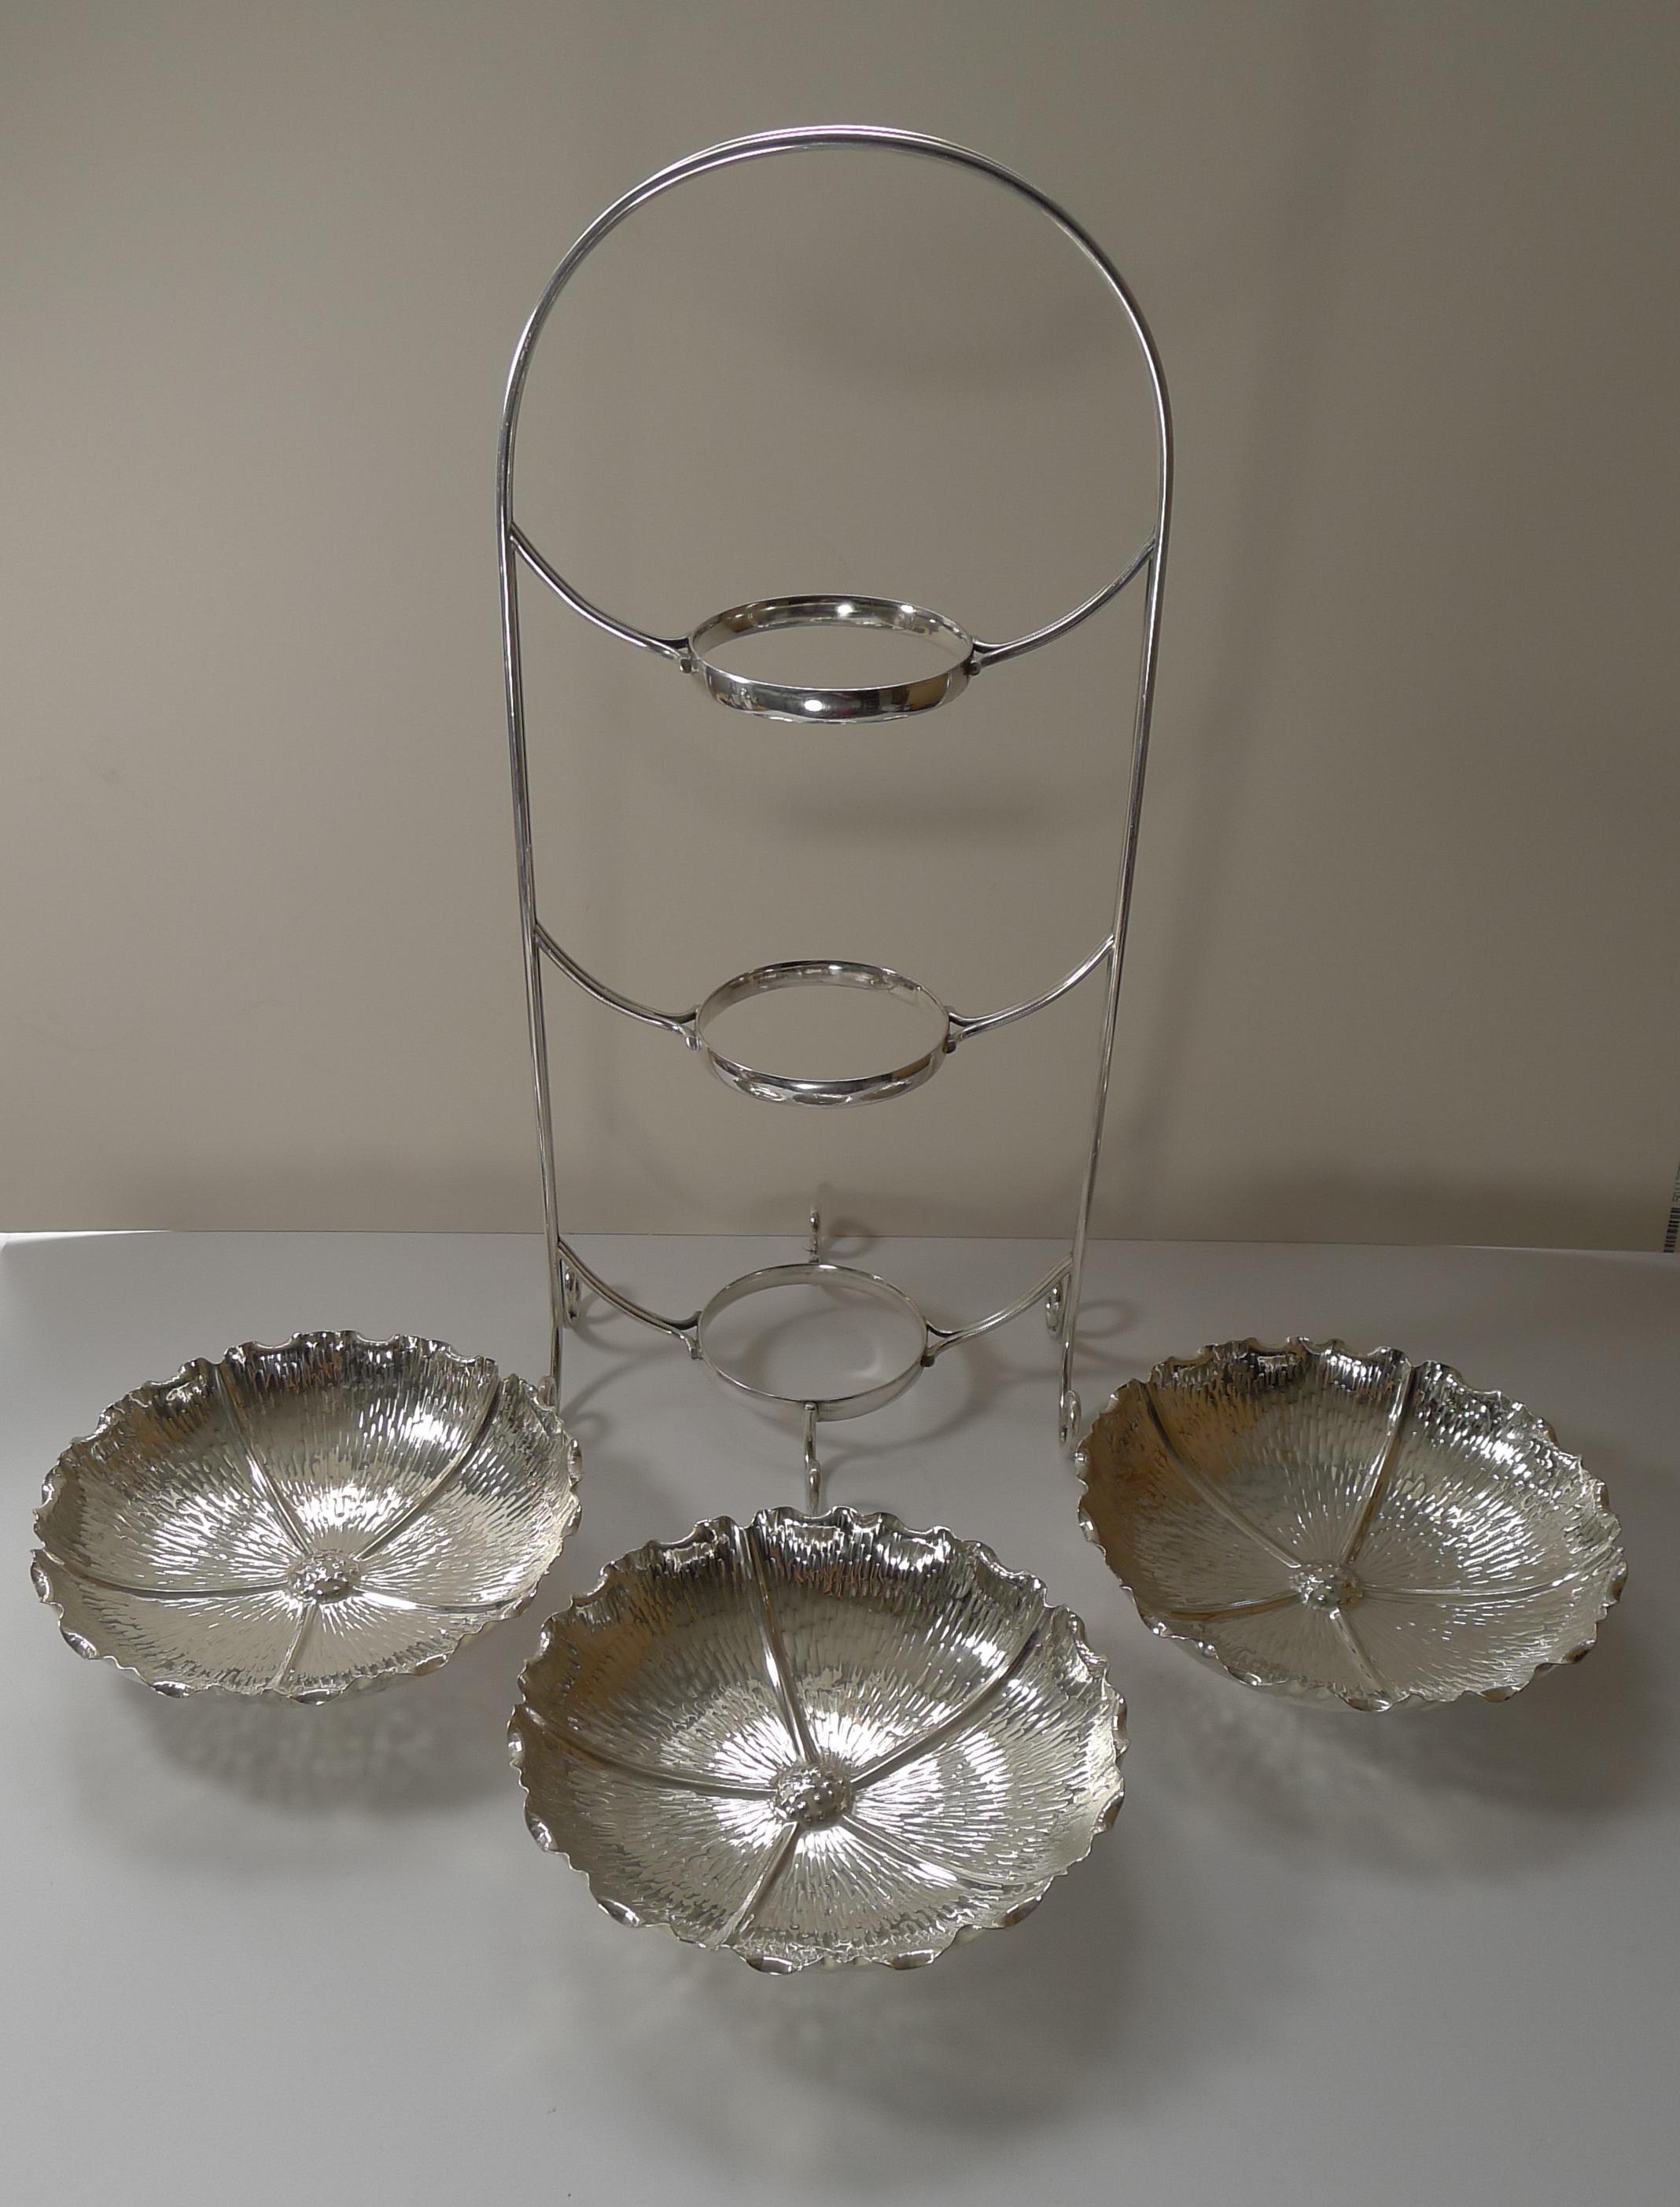 English Rare Three Tier Naturalistic Cake Stand by Hukin and Heath For Sale